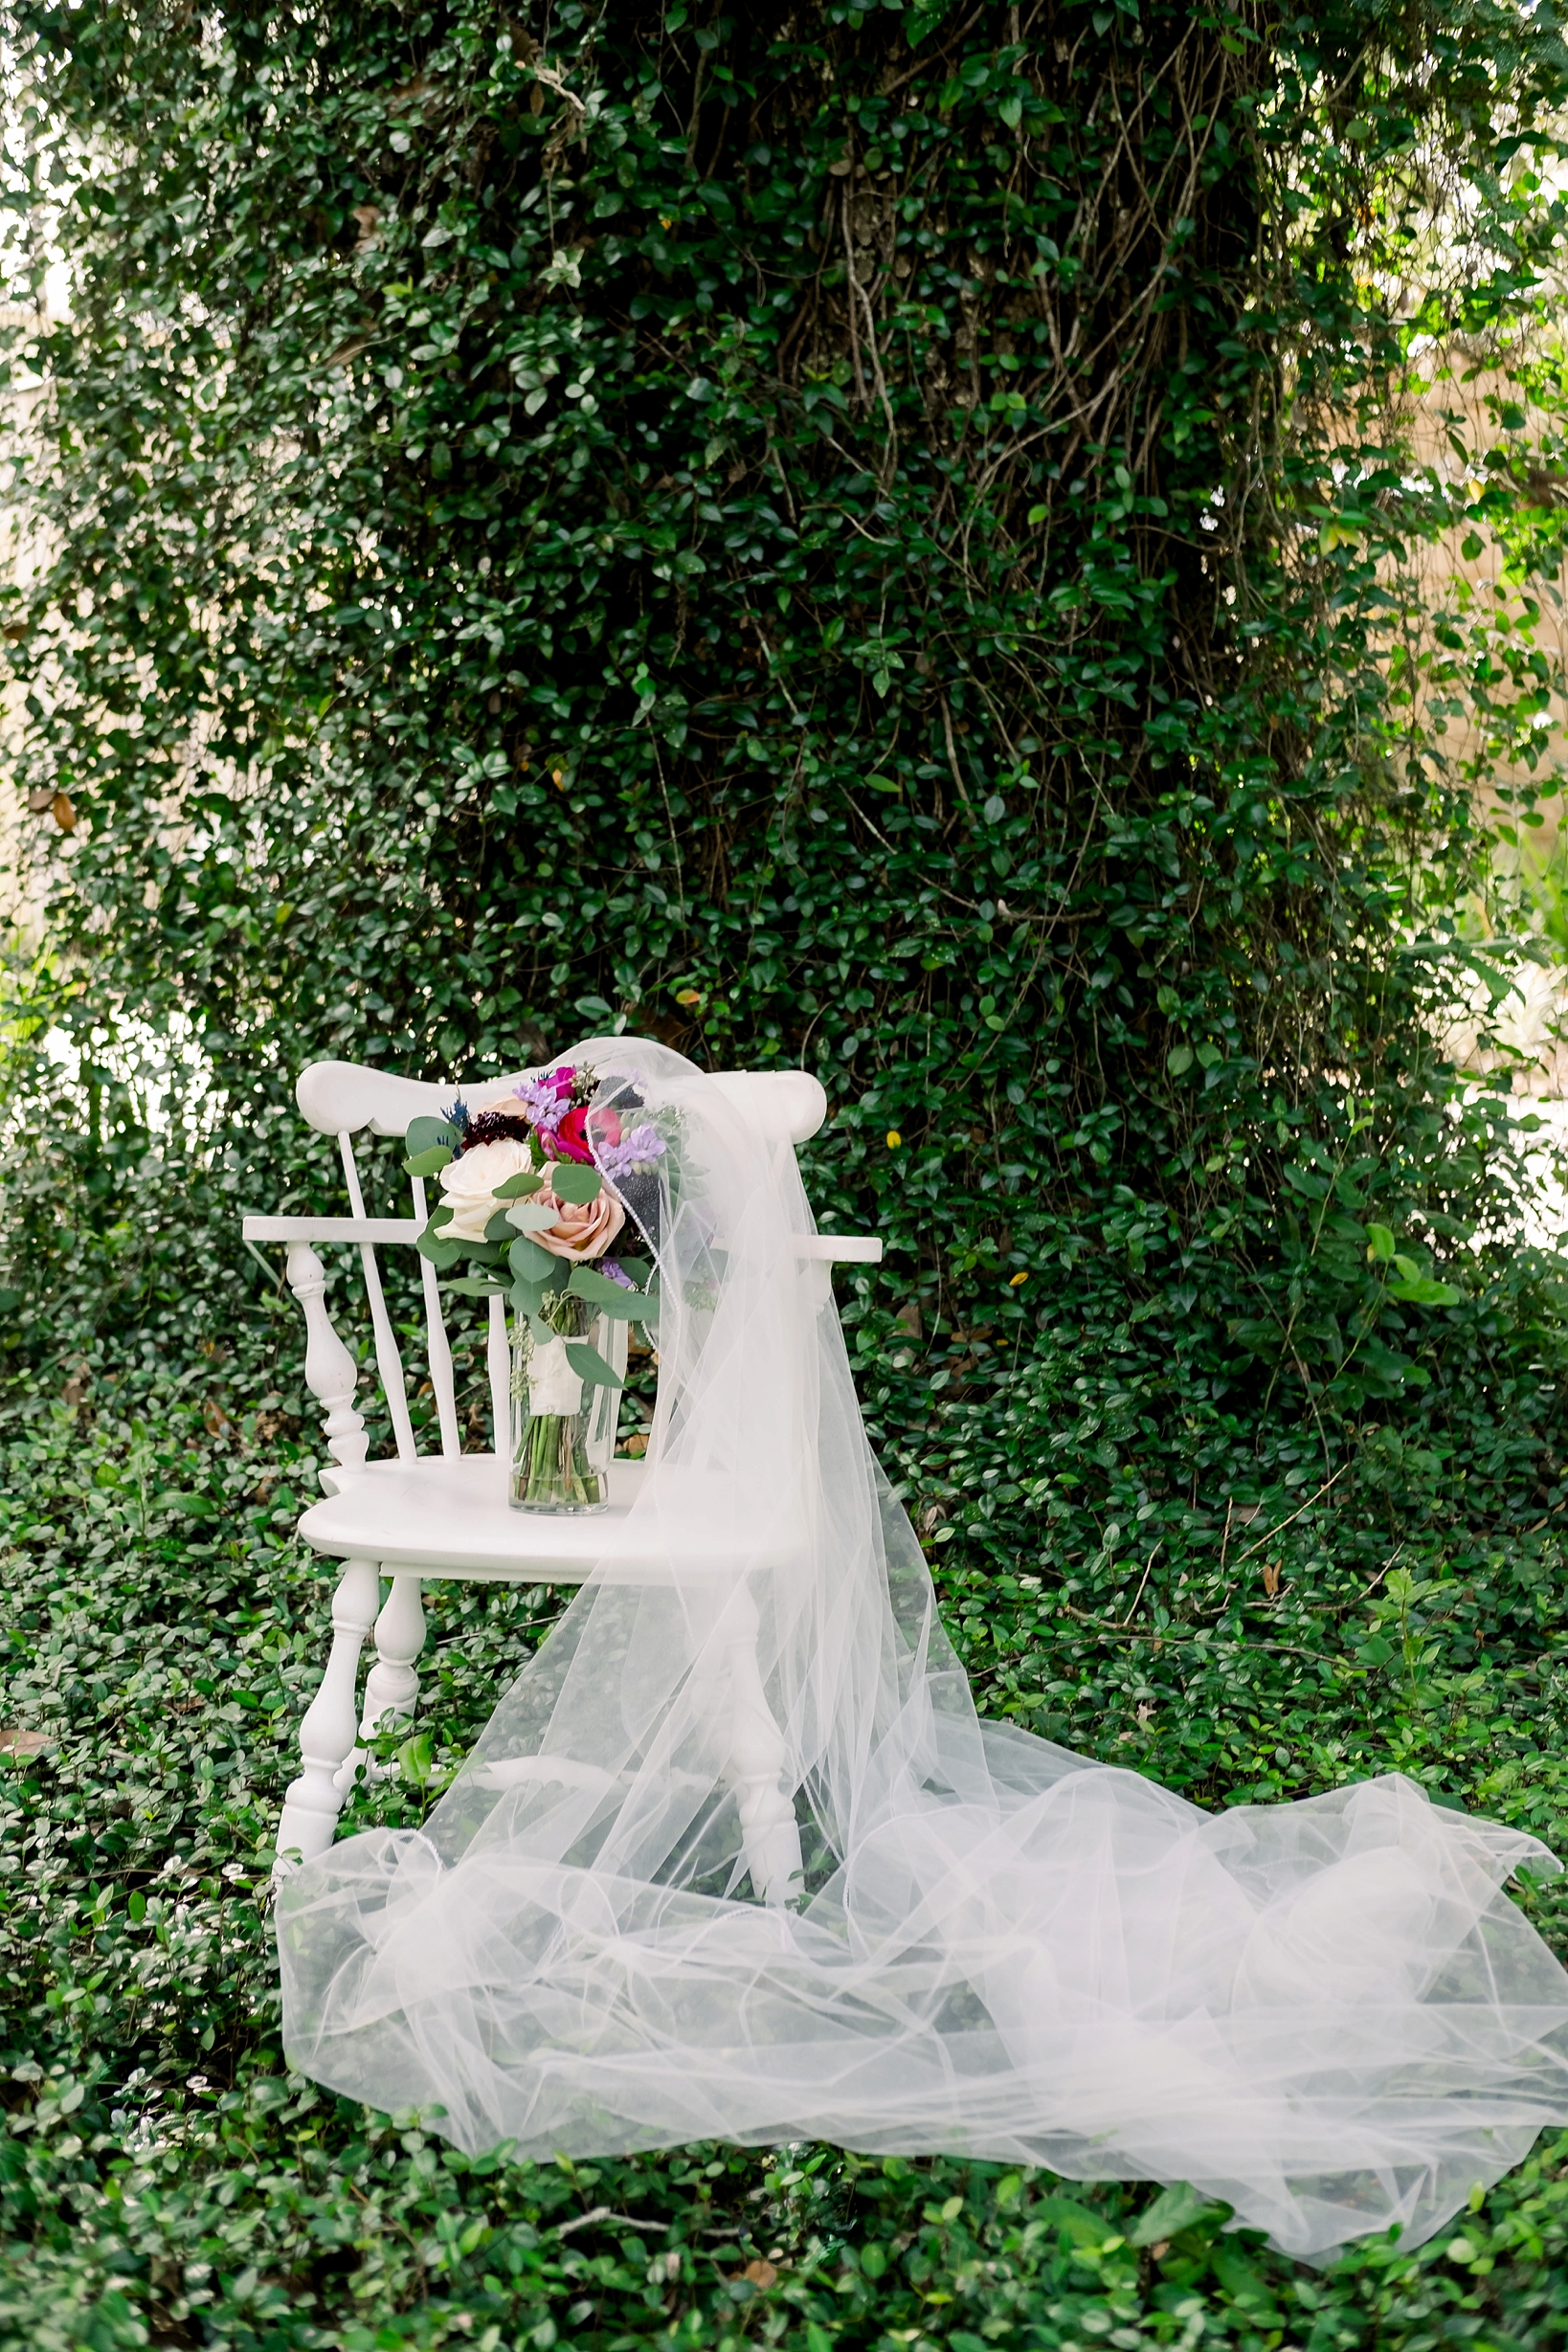 A cross creek wedding day filled with greenery and flowers filled with white tulle